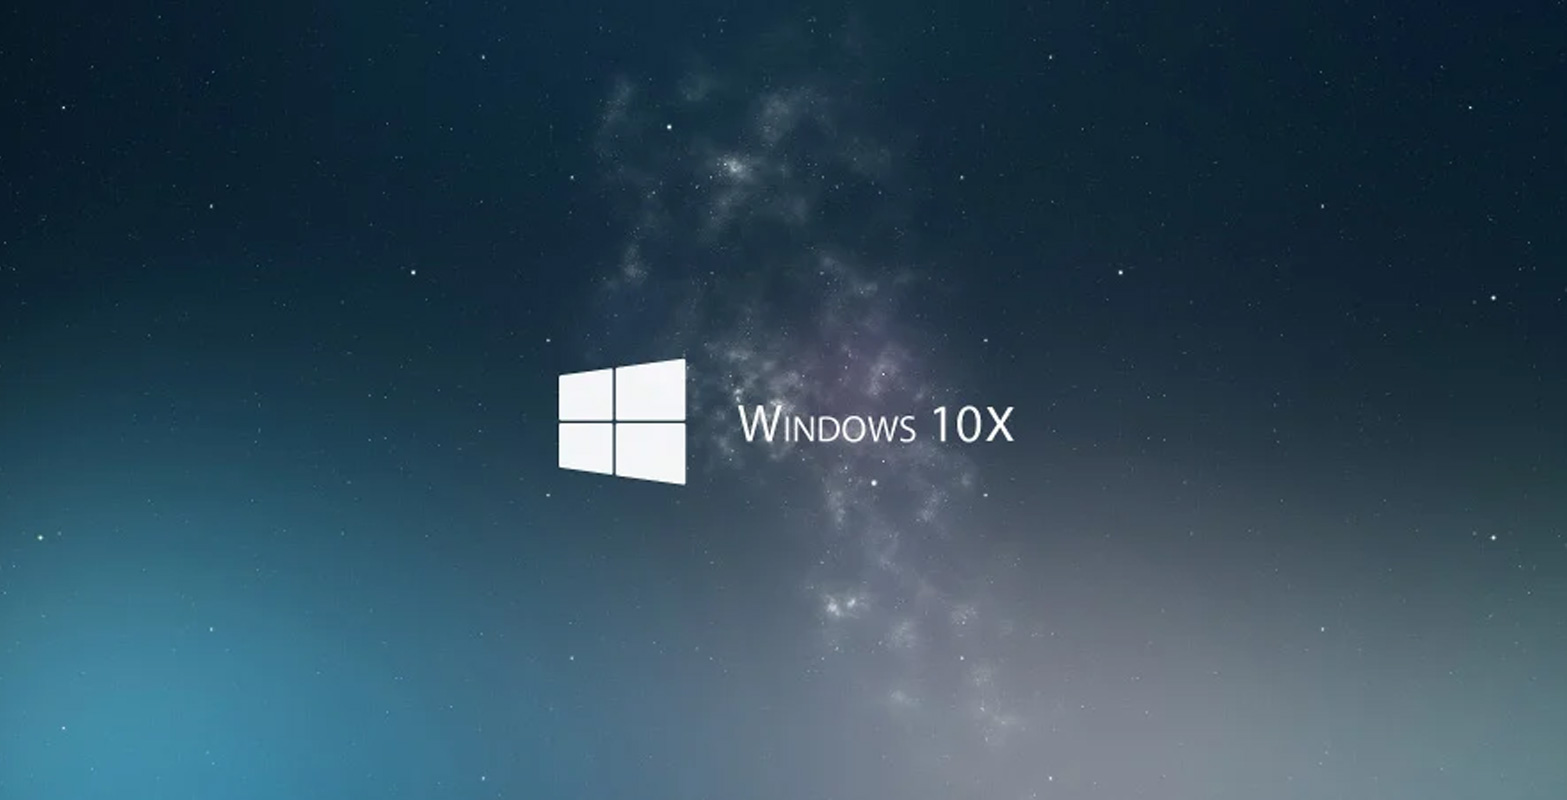 Windows 10X wallpaper with the text 